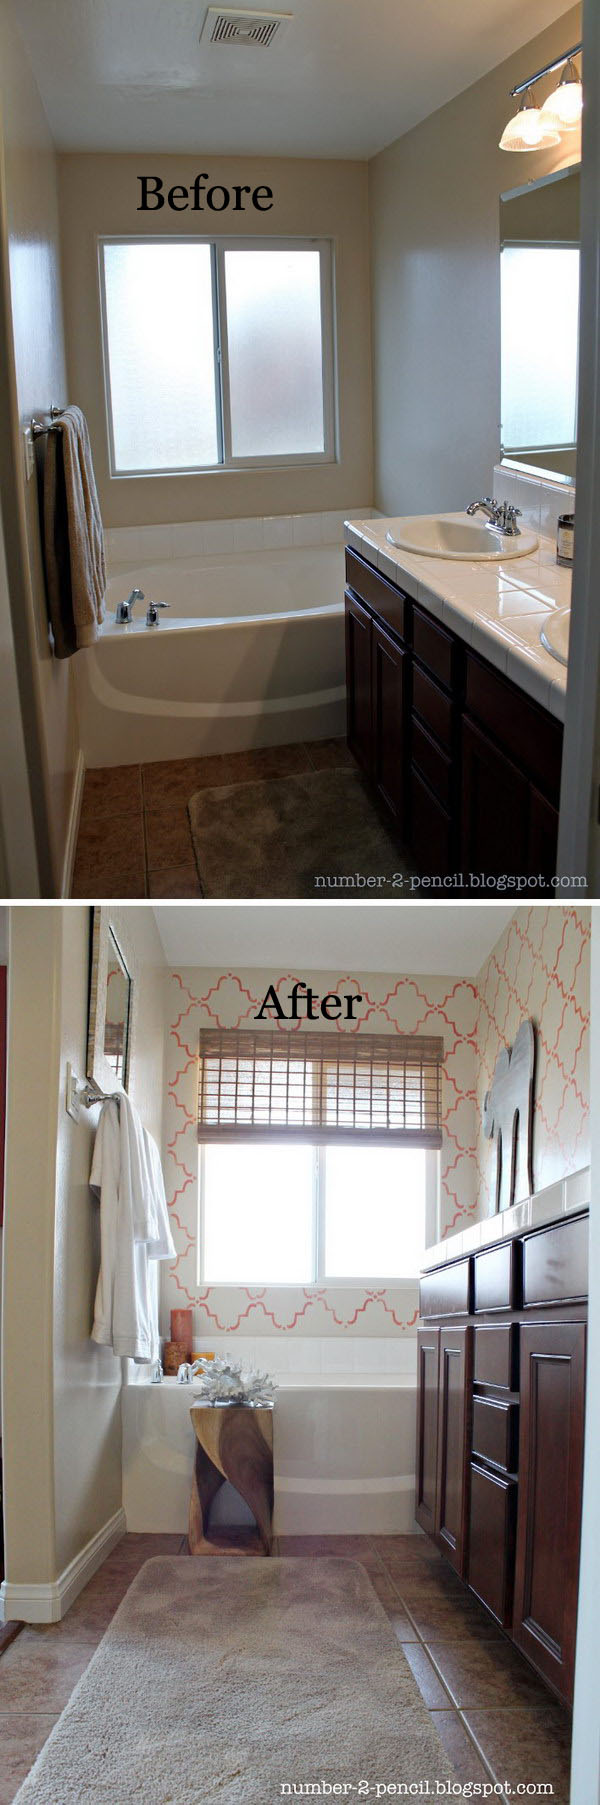 23-24-bathroom-remodel-before-and-after